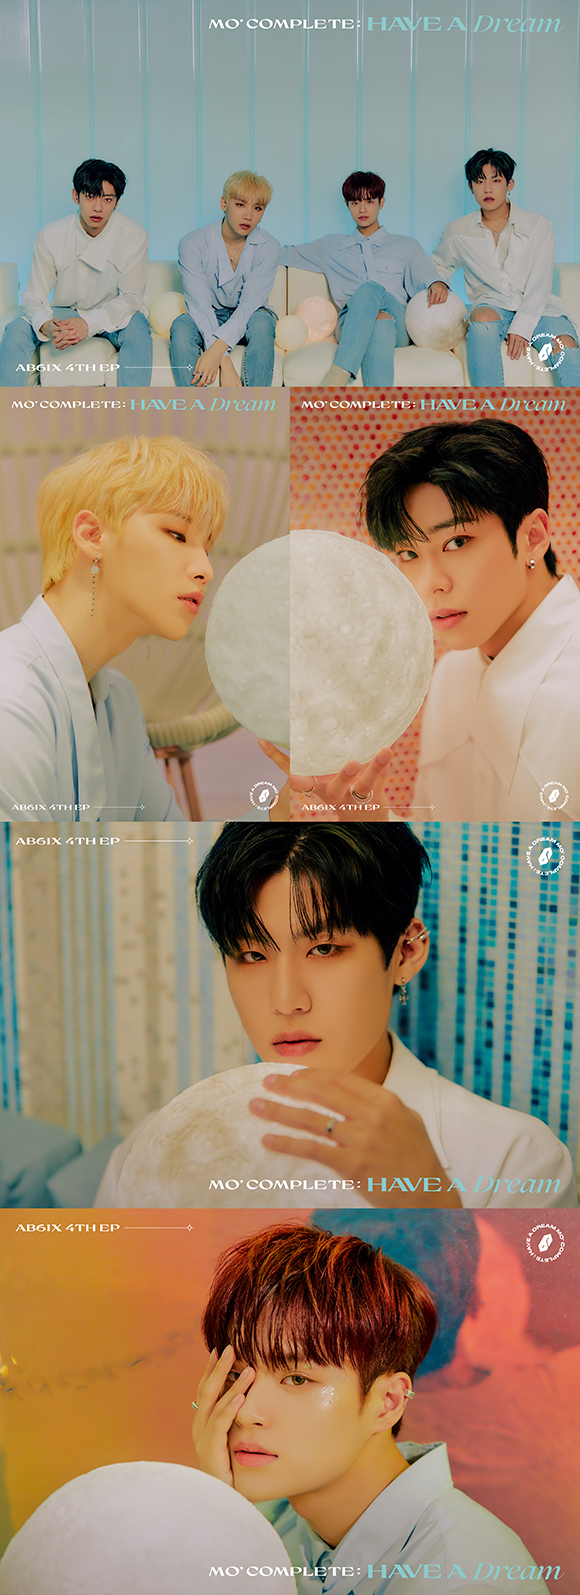 AB6IX (Abisix) has emanated a mysterious atmosphere.Brand New Music released the second concept photo of AB6IXs fourth EP MO COMPLETE: HAVE A DREAM, which will be released on April 26 through the official SNS channels of AB6IX on April 13th.AB6IX members in group photos, which produced a simple and sensual style with different details of shirts and jeans, focused their attention on their unique cynical mood.In the ensuing personal photos, Jeon Woong captivated the eye with a sculptural smooth sideline, Kim Dong-Hyun overwhelmed the atmosphere with a more mature visual, Park Woo-jin enhanced the attraction with a deep, intense eye, and Lee Dae-hwi, who gave the point with glitter makeup, fascinated those who saw it as a fascinating aura at once ...AB6IX, which unveiled its own charm, which has become thicker than before, will release the remaining promotional contents sequentially before the comeback, and will further enhance curiosity about the album by releasing the second concept photo of the new album MOs COMPLETE: HAVE A DREAM.